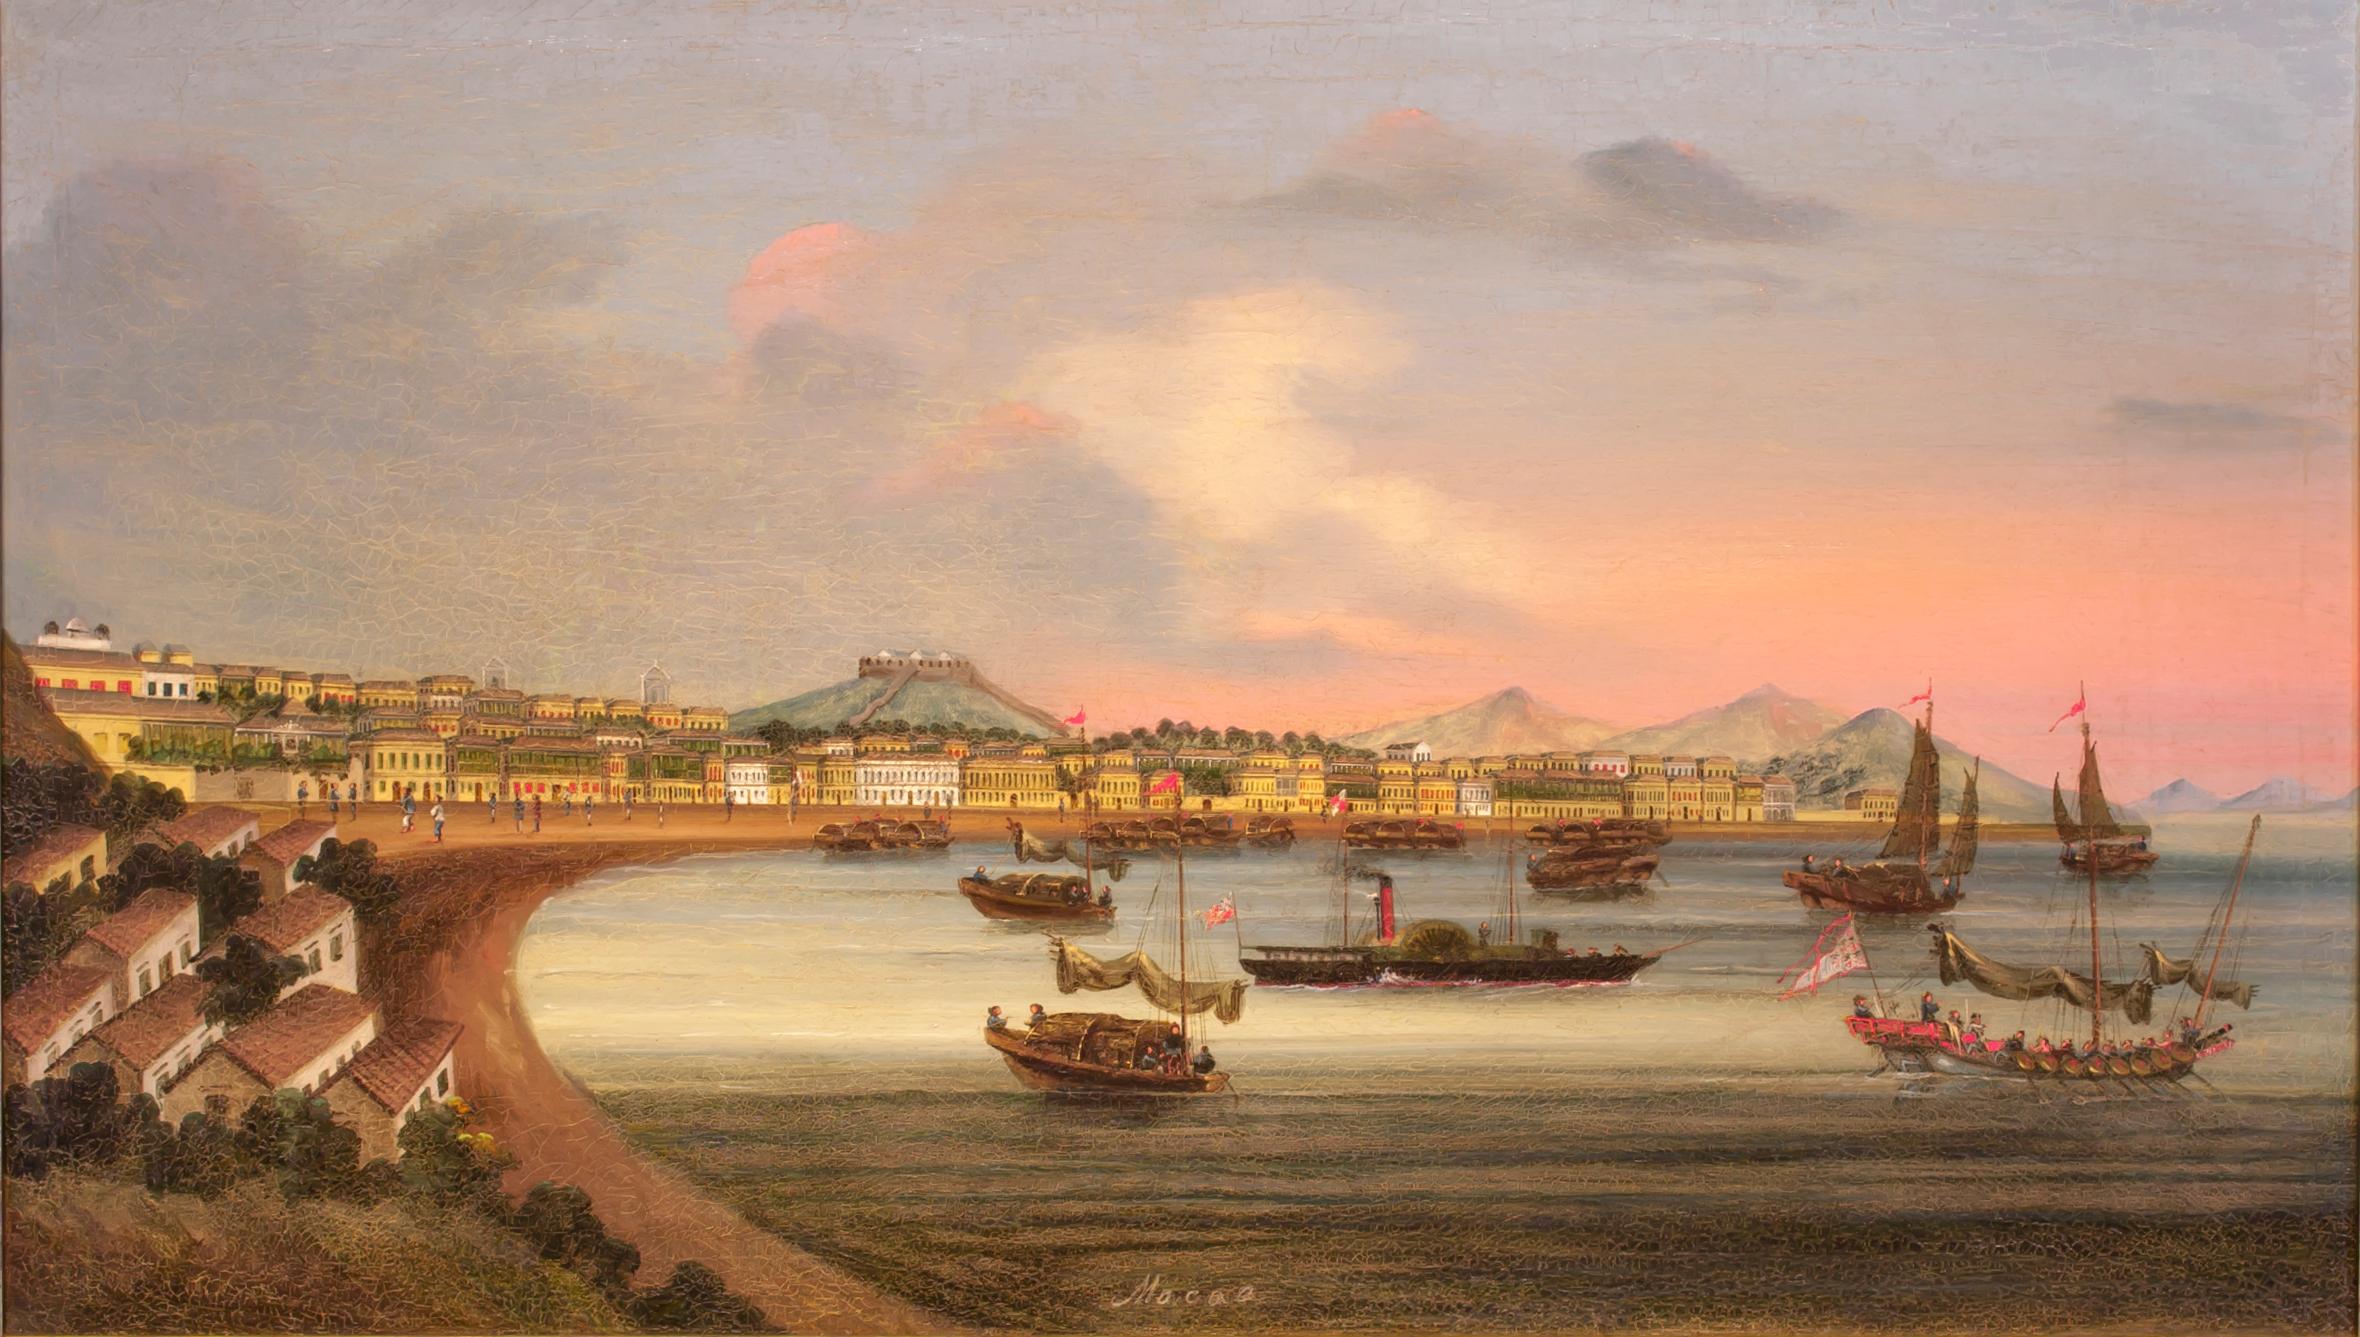 Macao - Painting de 19th Century Chinese school